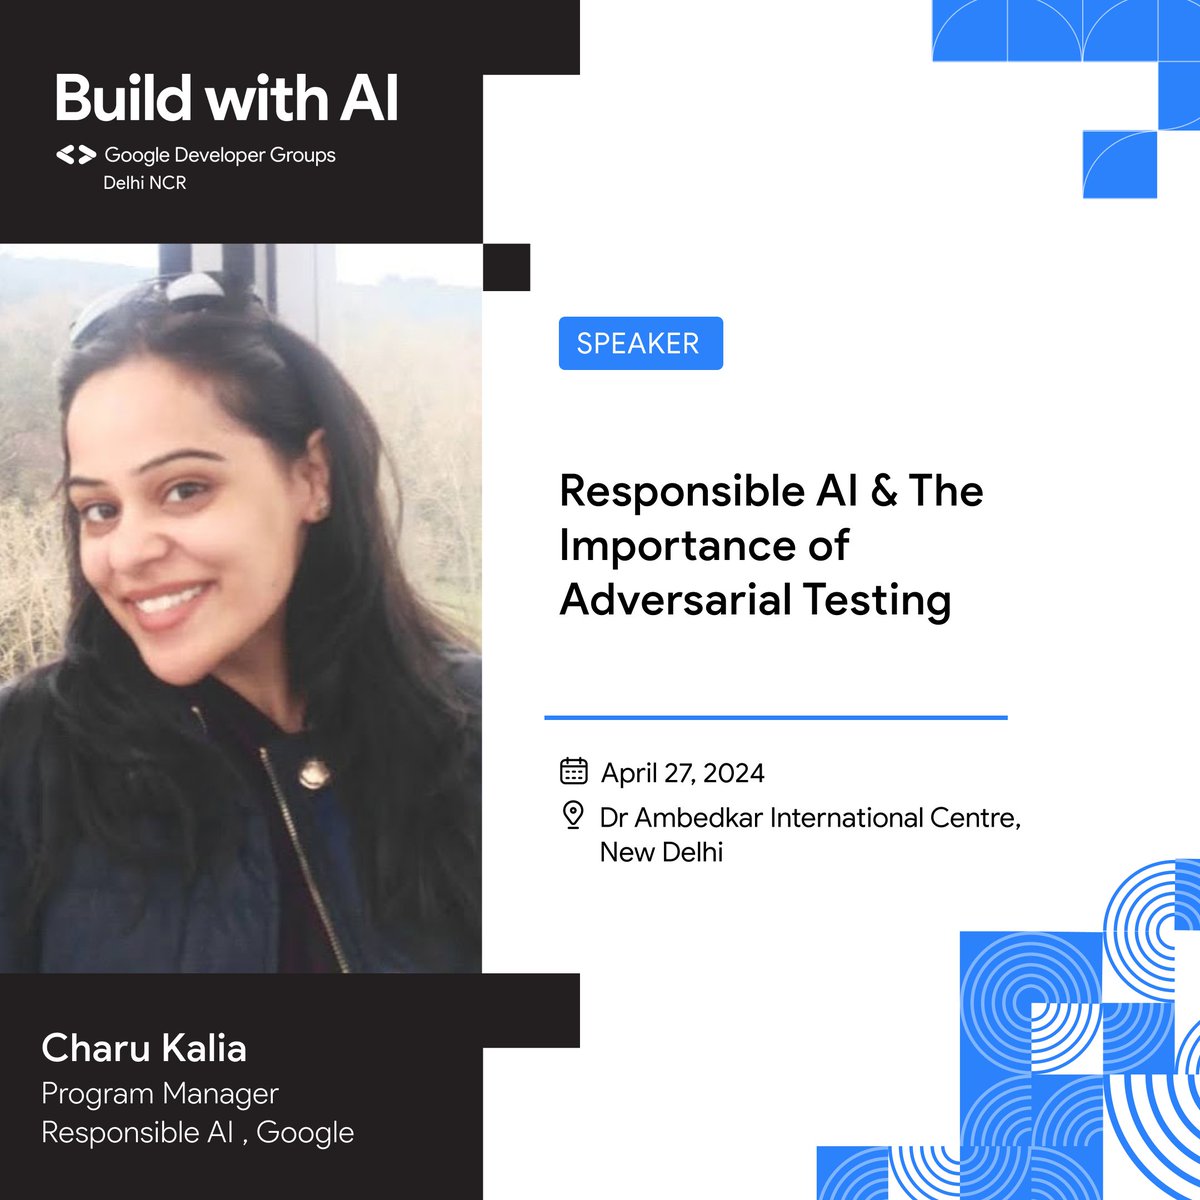 Charu Kalia - Responsible AI: Listen up, AI builders! 👂 As this shiny new tech goes mainstream, it's critical we develop it responsibly. That's why we've got Charu Kalia, a Program Manager for Responsible AI at Google.